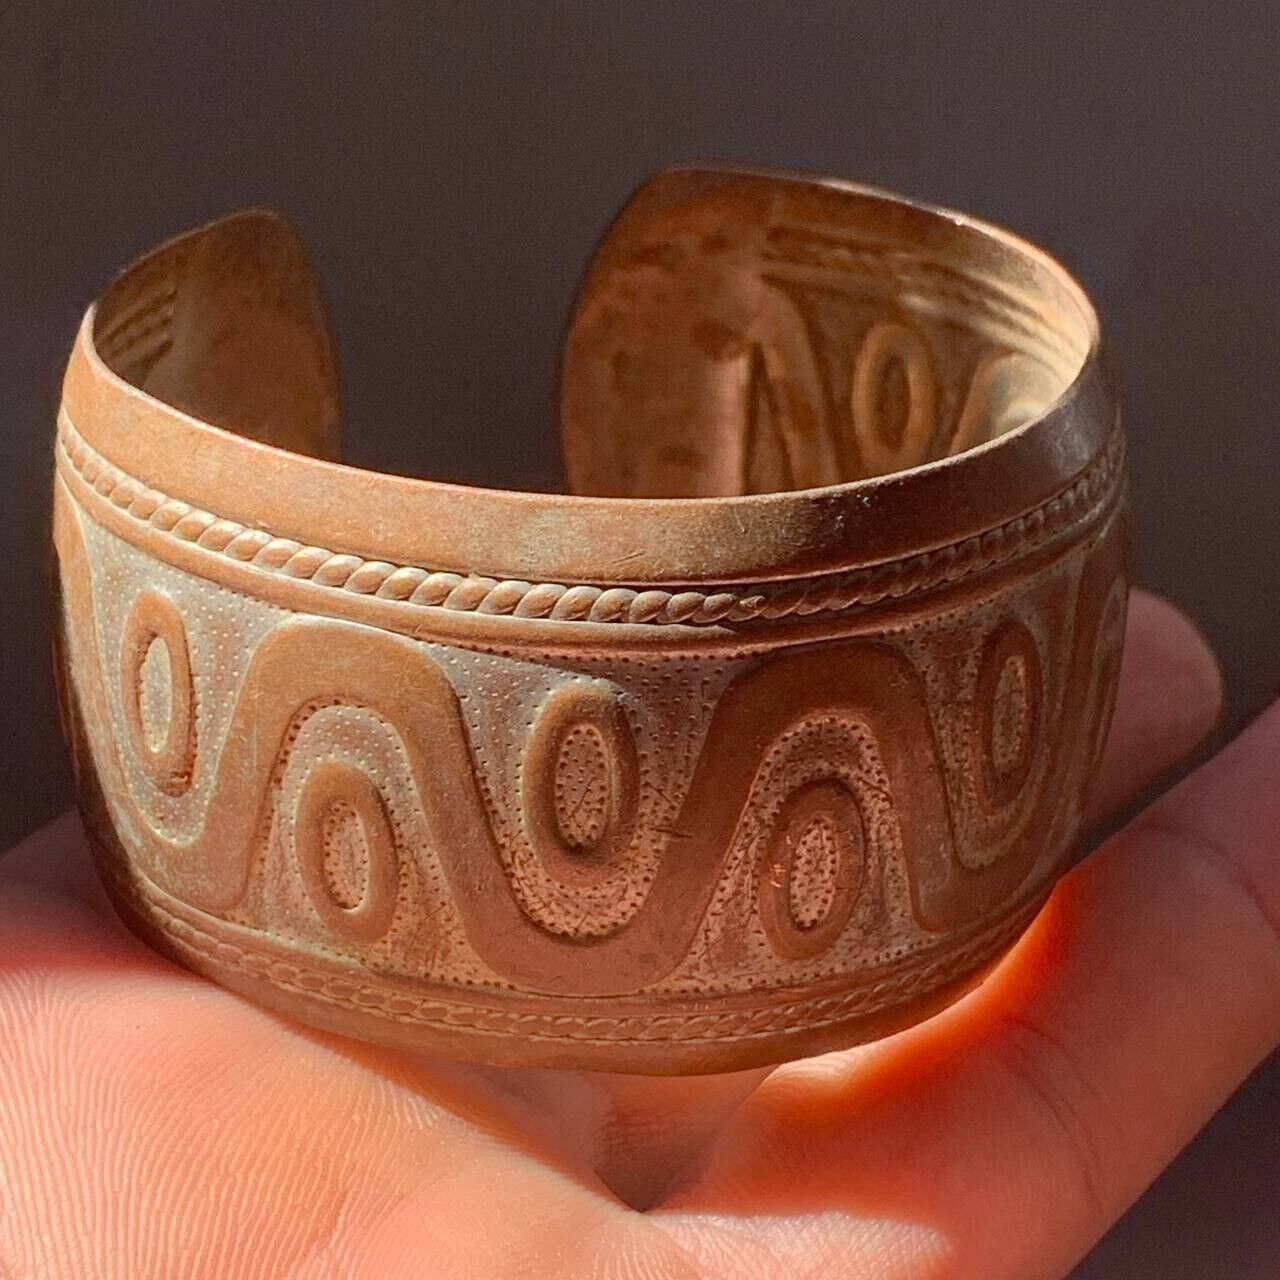 VERY STUNNING ANCIENT BRONZE RARE BRACELET VIKING ANTIQUE ARTIFACT OLD AUTHENTIC